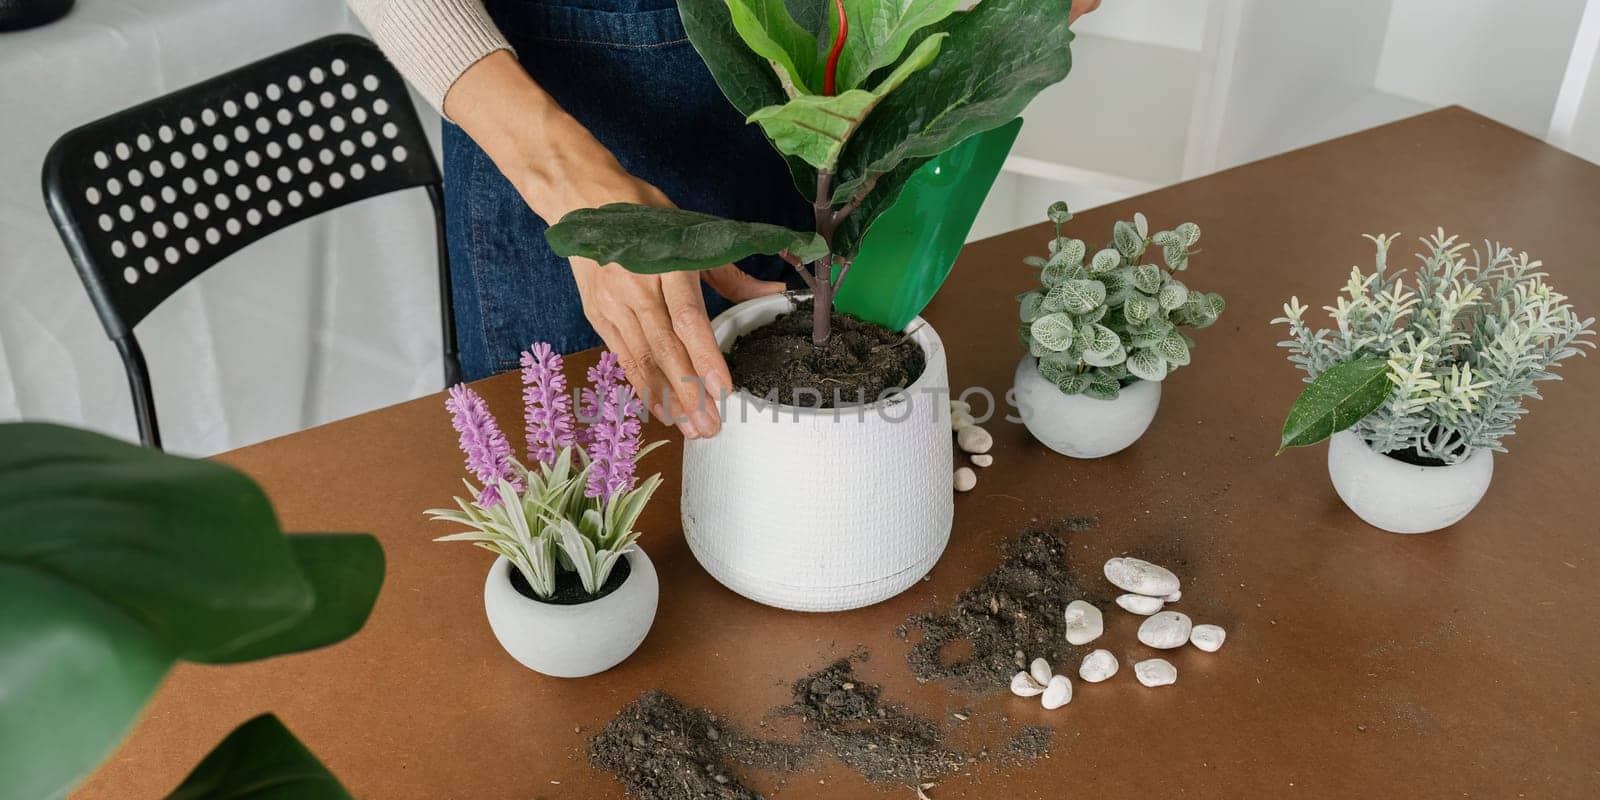 A woman is planting a plant in a white pot. The plant is surrounded by other plants in different pots